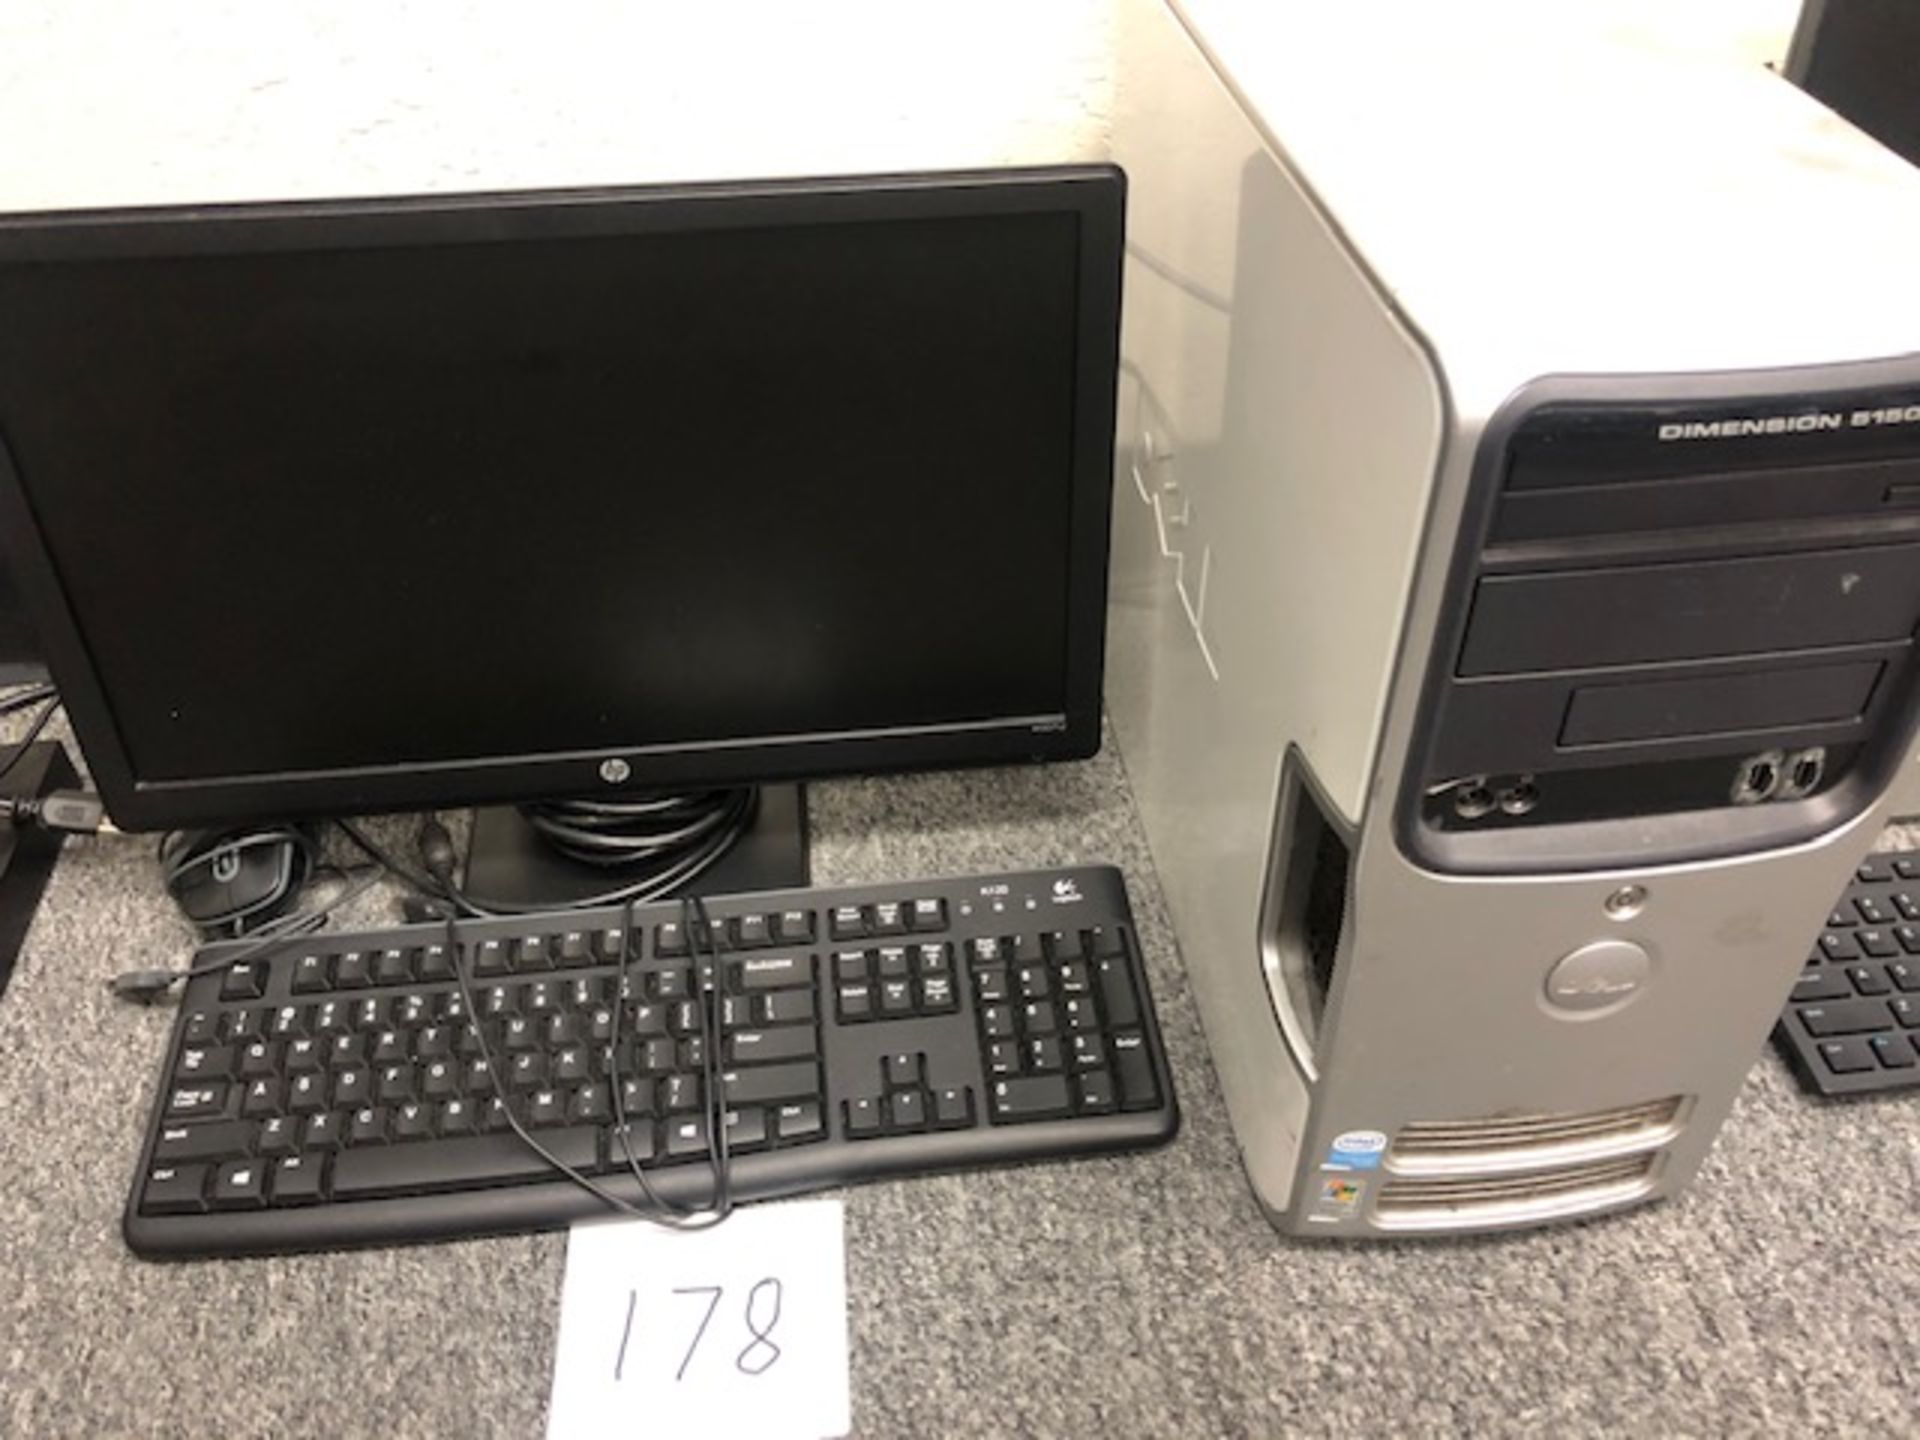 Dell Dimension 5150 computer, HP monitor and keyboard